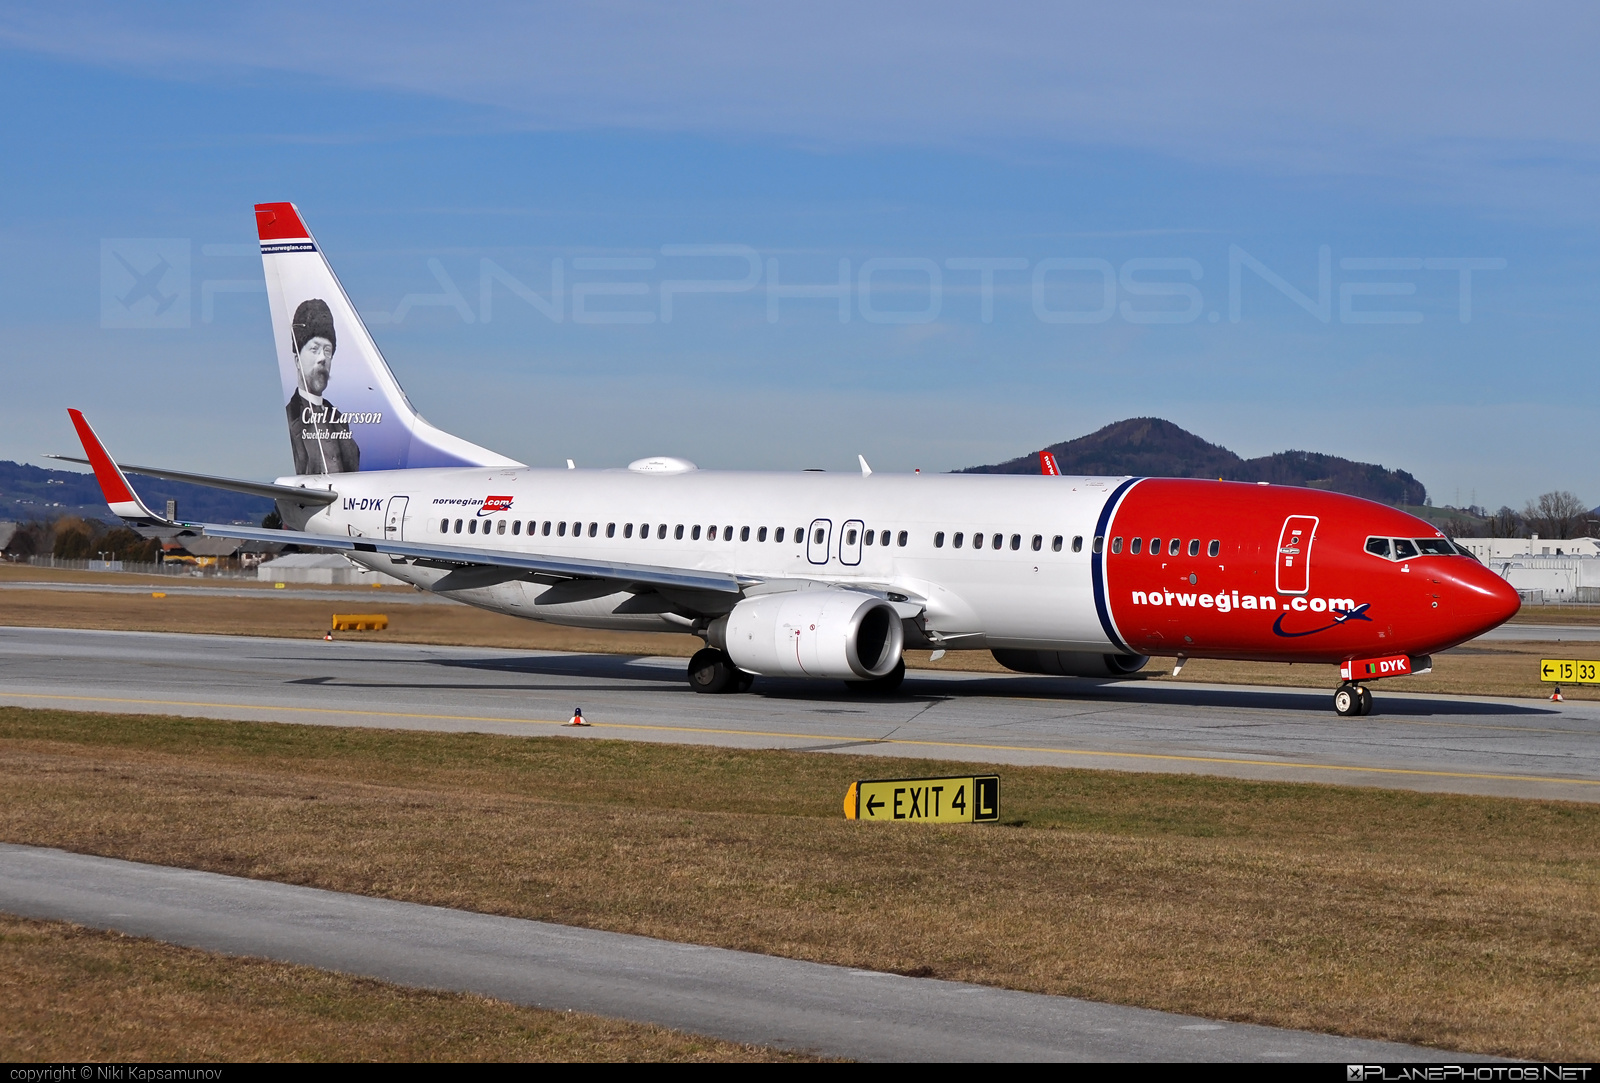 Boeing 737-800 - LN-DYK operated by Norwegian Air Shuttle #b737 #b737nextgen #b737ng #boeing #boeing737 #norwegian #norwegianair #norwegianairshuttle